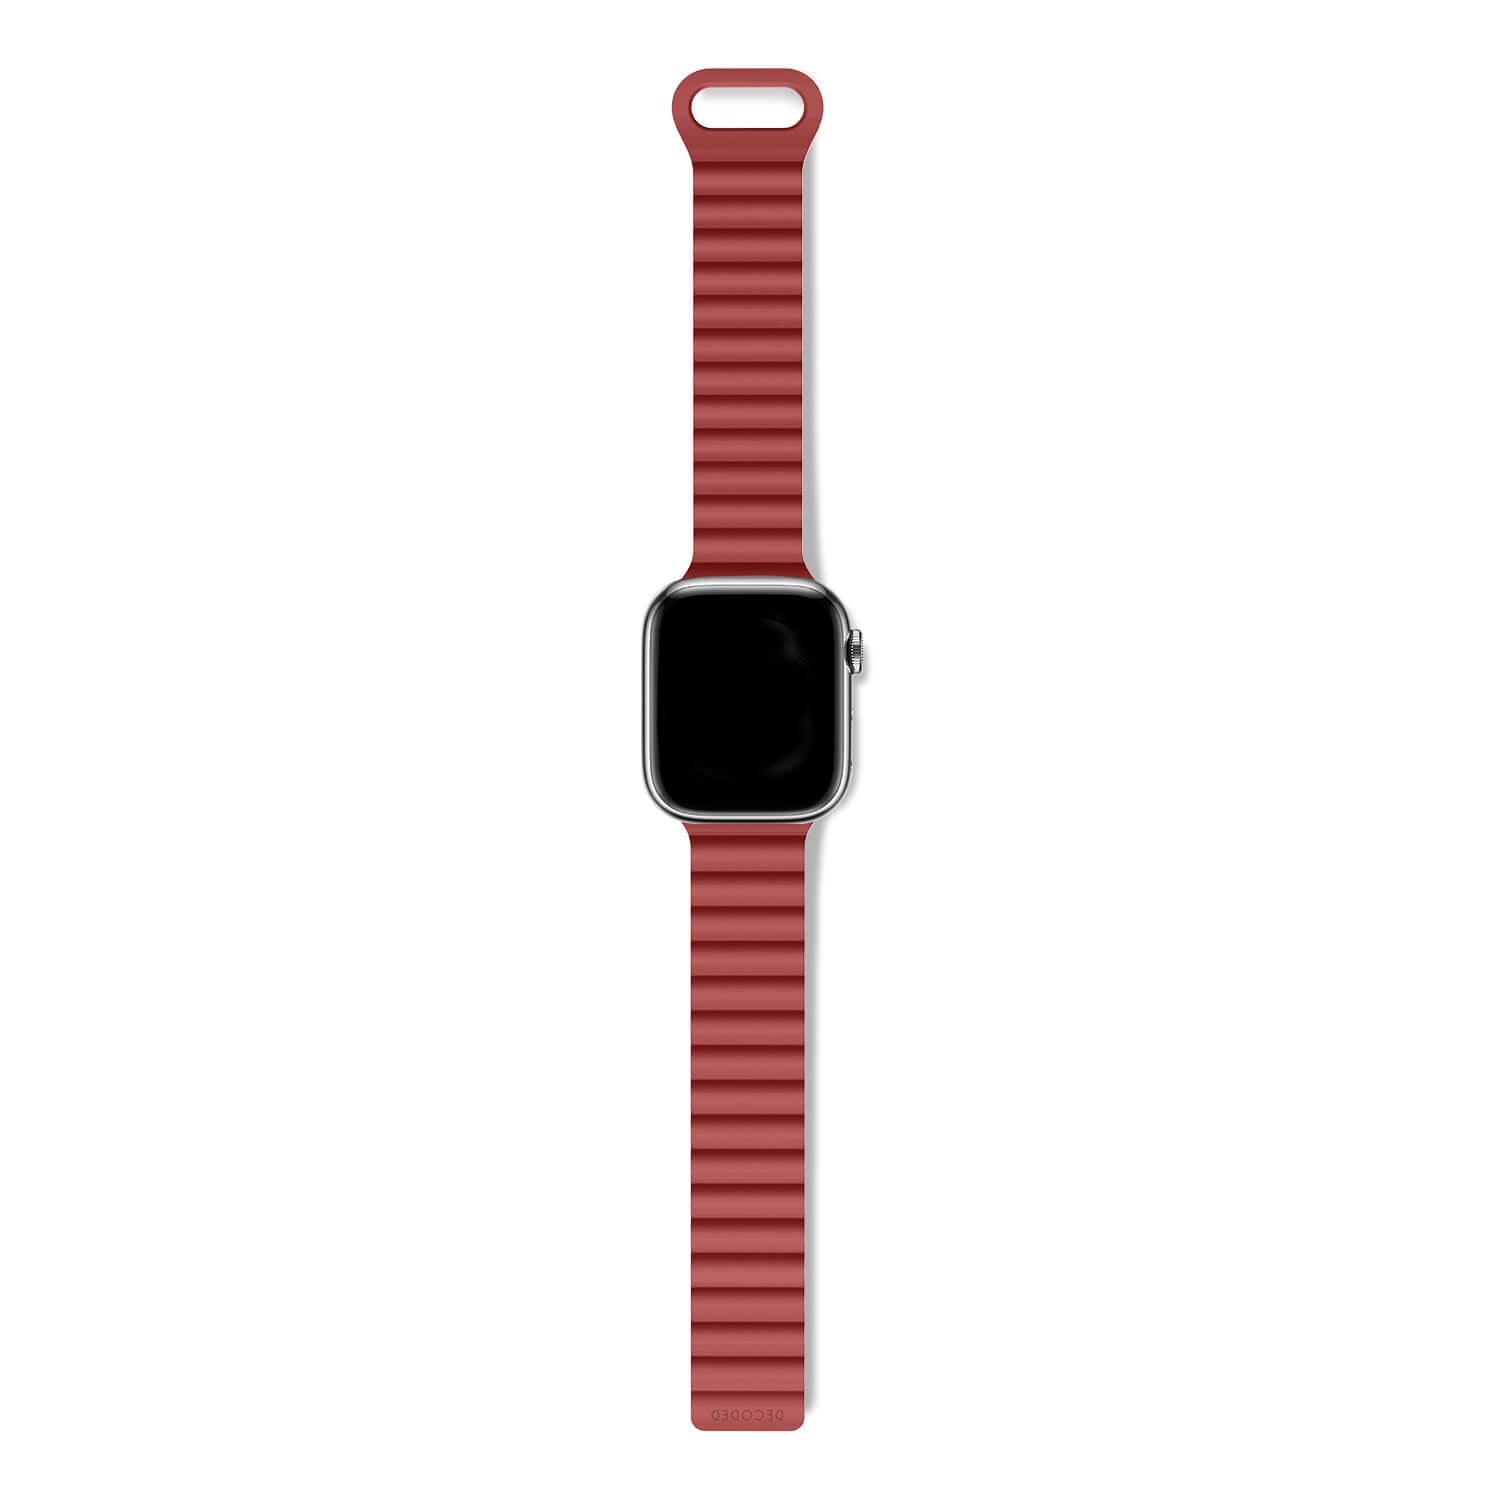 Silicone Traction Loop Strap Apple Watch 41mm Series 7, Astro Dust